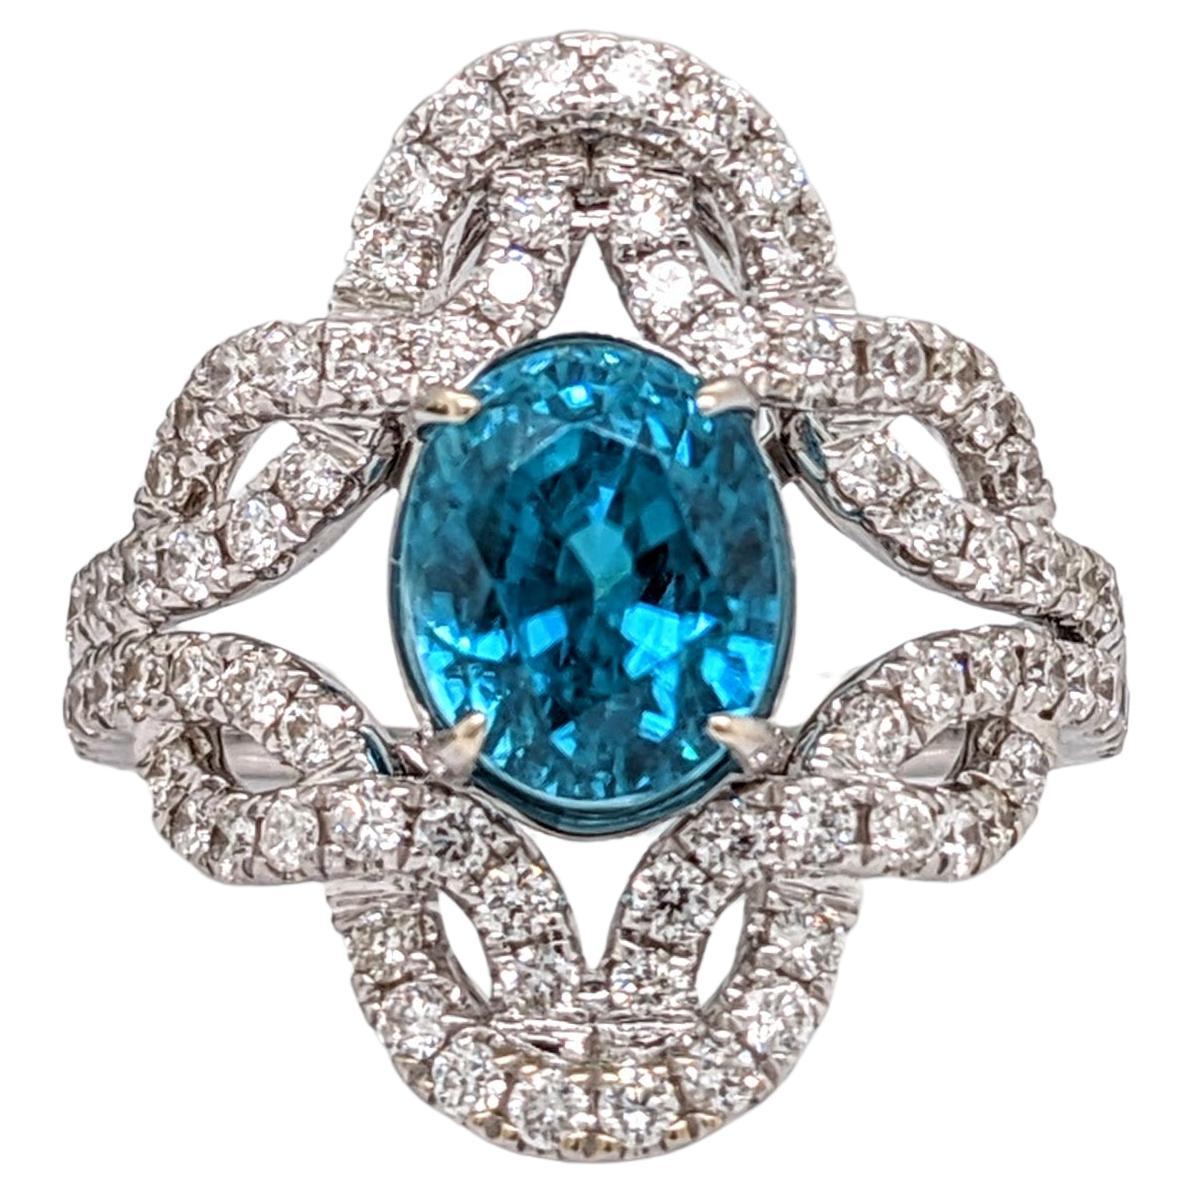 4.6ct Blue Zircon Ring in 14K Gold w Natural Diamond Accents  Intricate Pavé For Sale